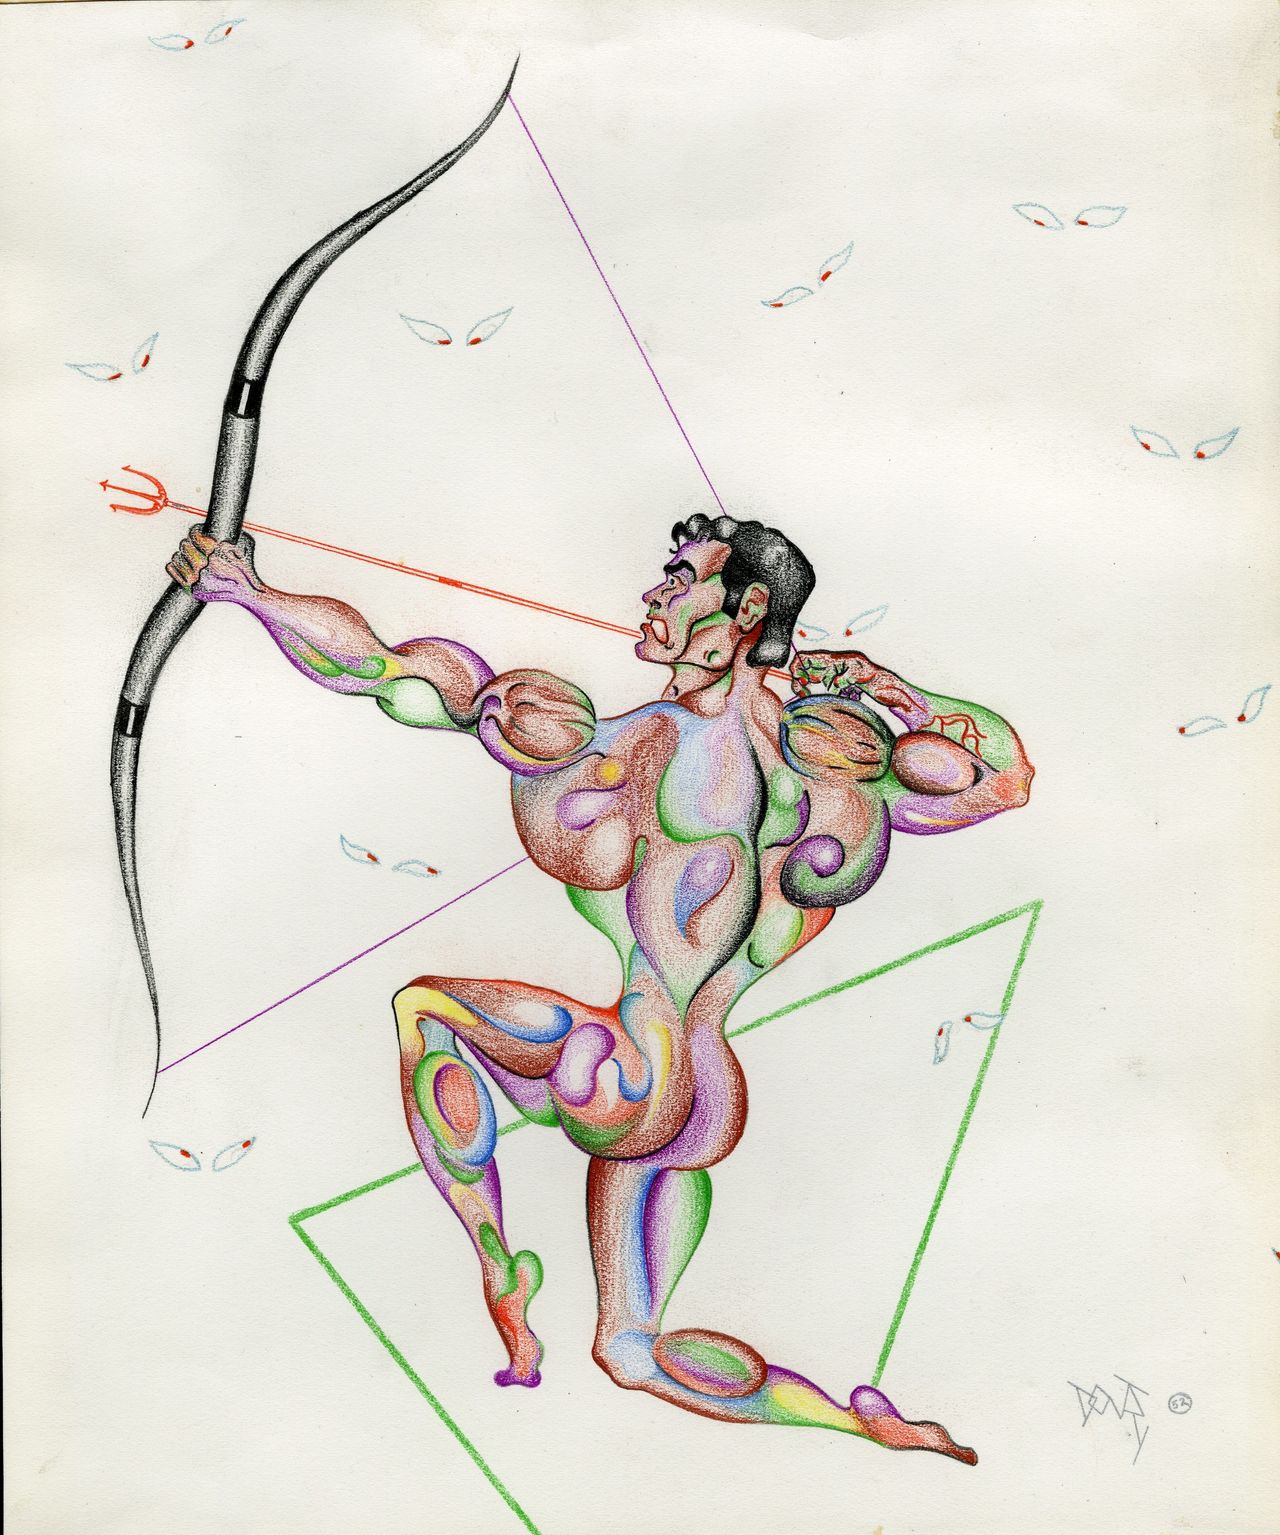 "Don Tonry Archer," 1952, graphite and crayon on paper.